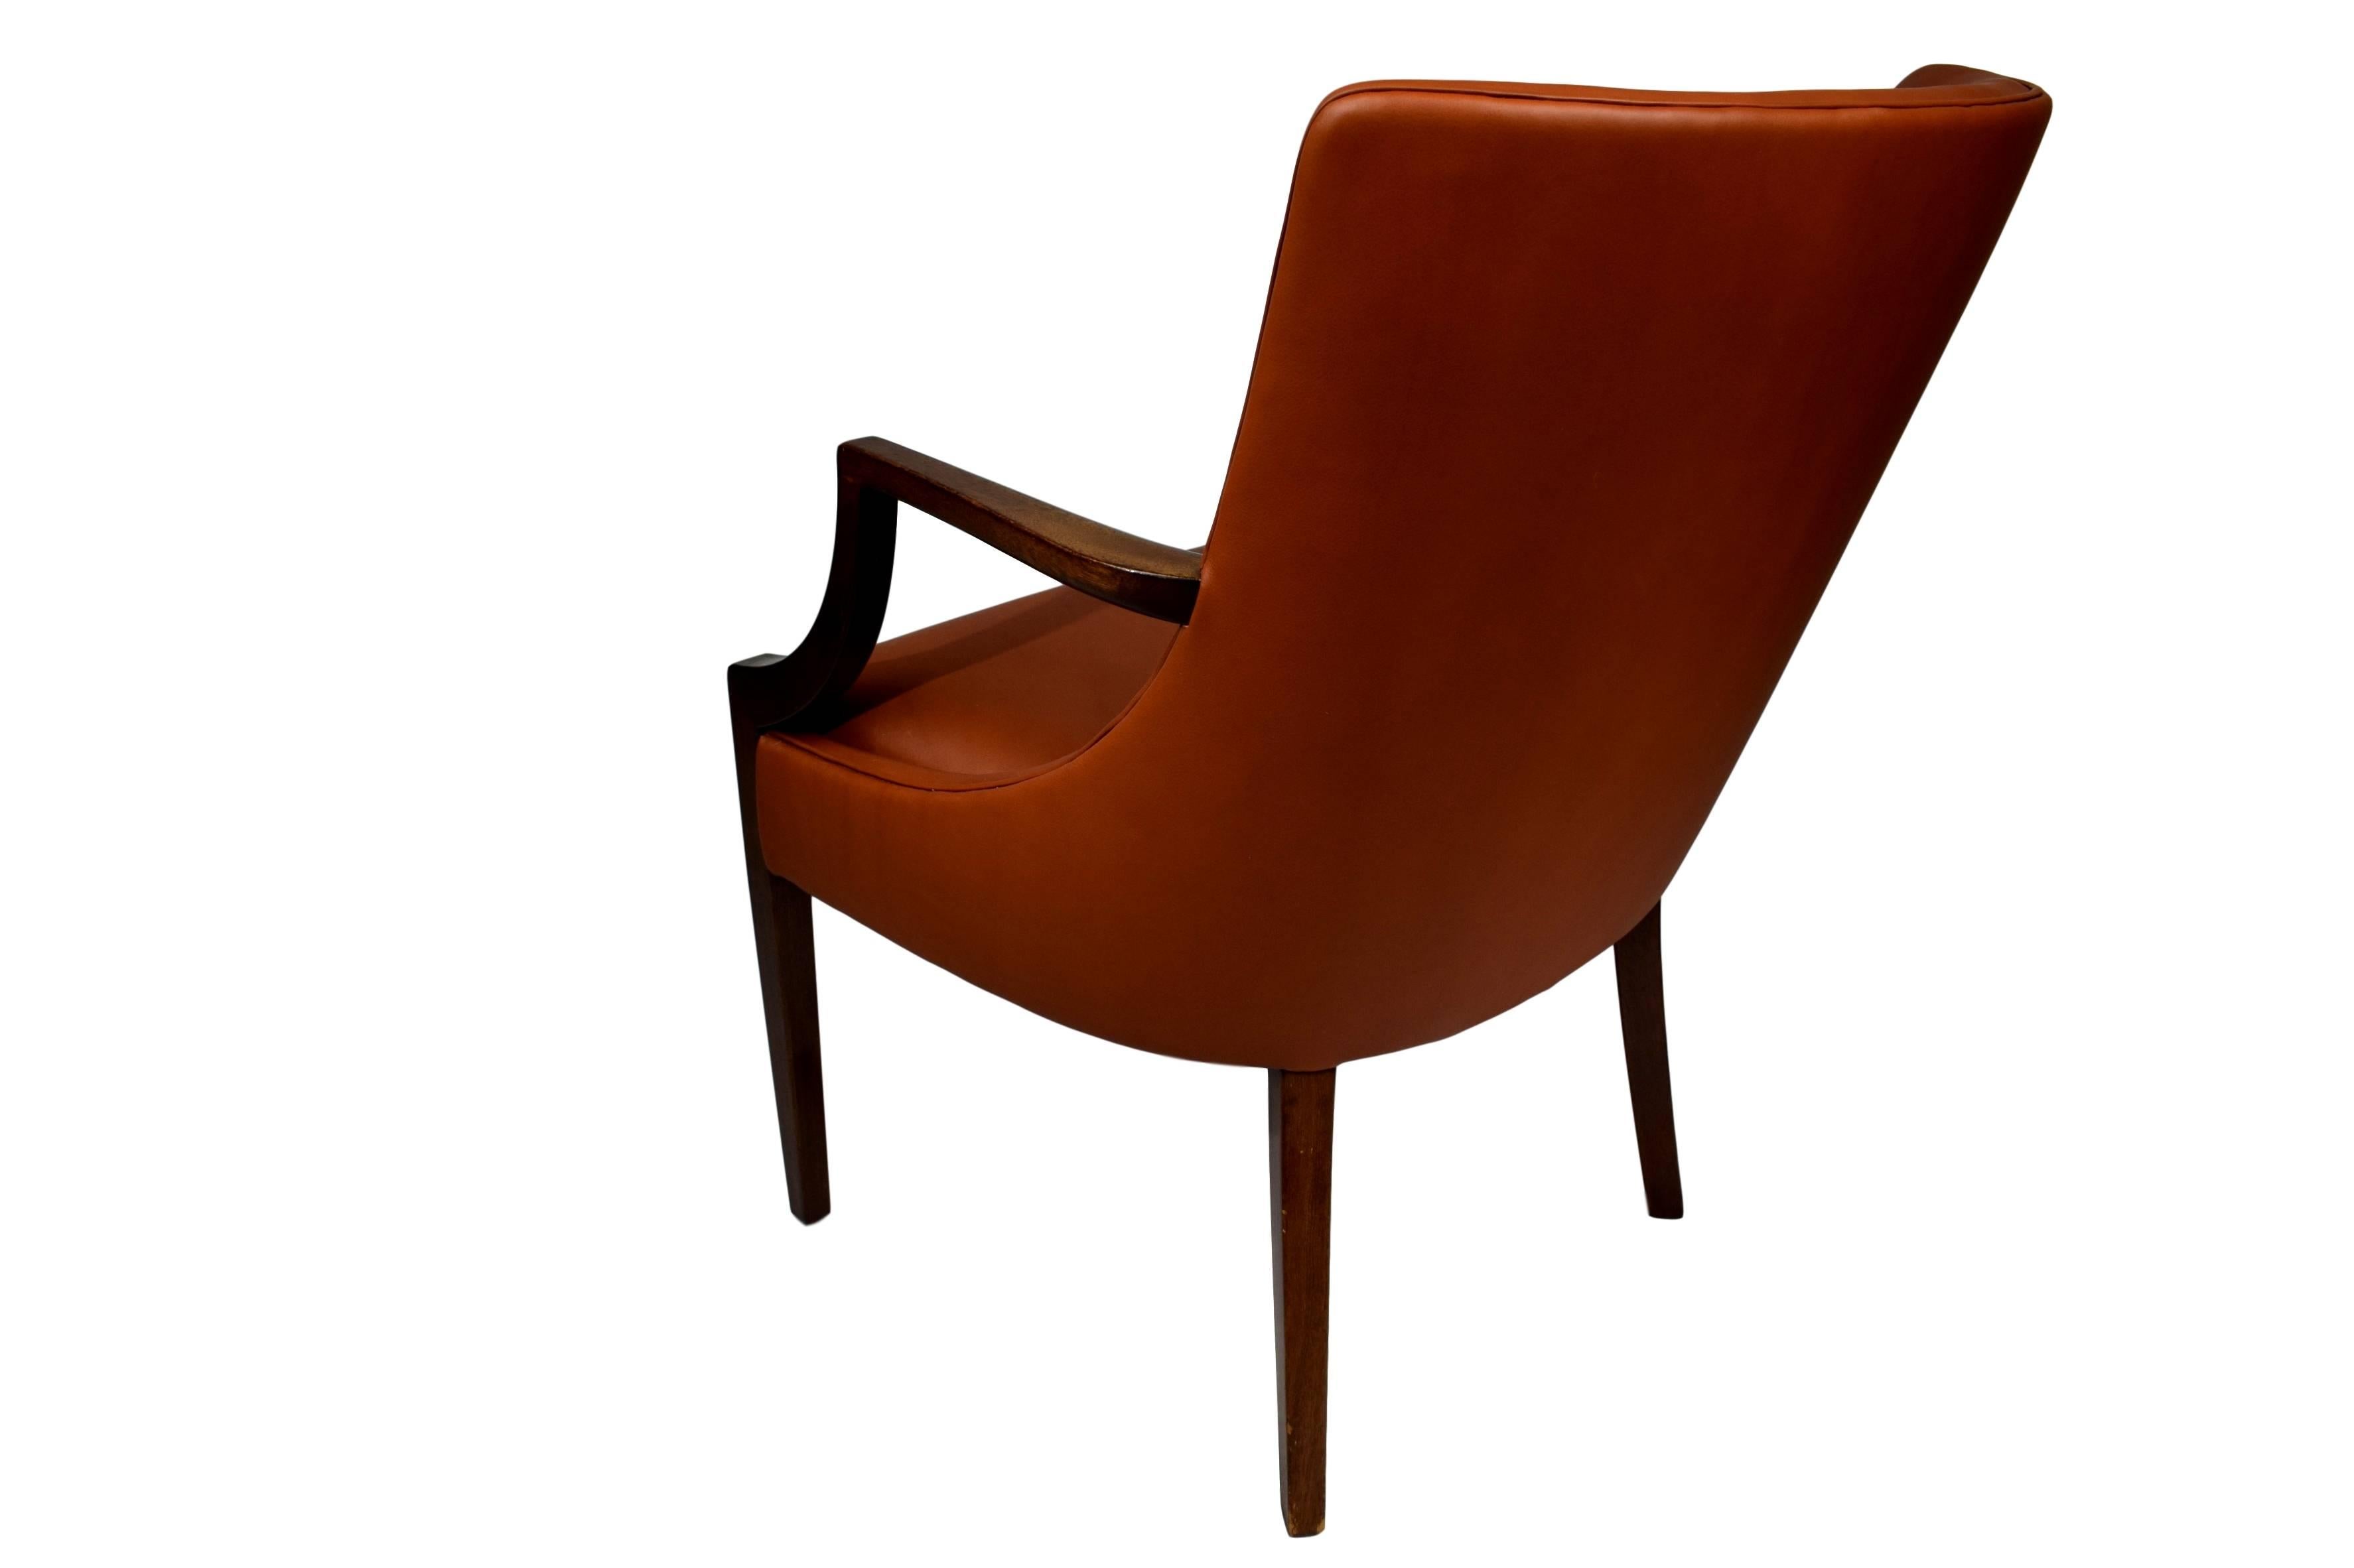 Early Danish Midcentury Aniline Leather Armchair Ole Wanscher, A.J. Iversen In Good Condition For Sale In Denmark, DK